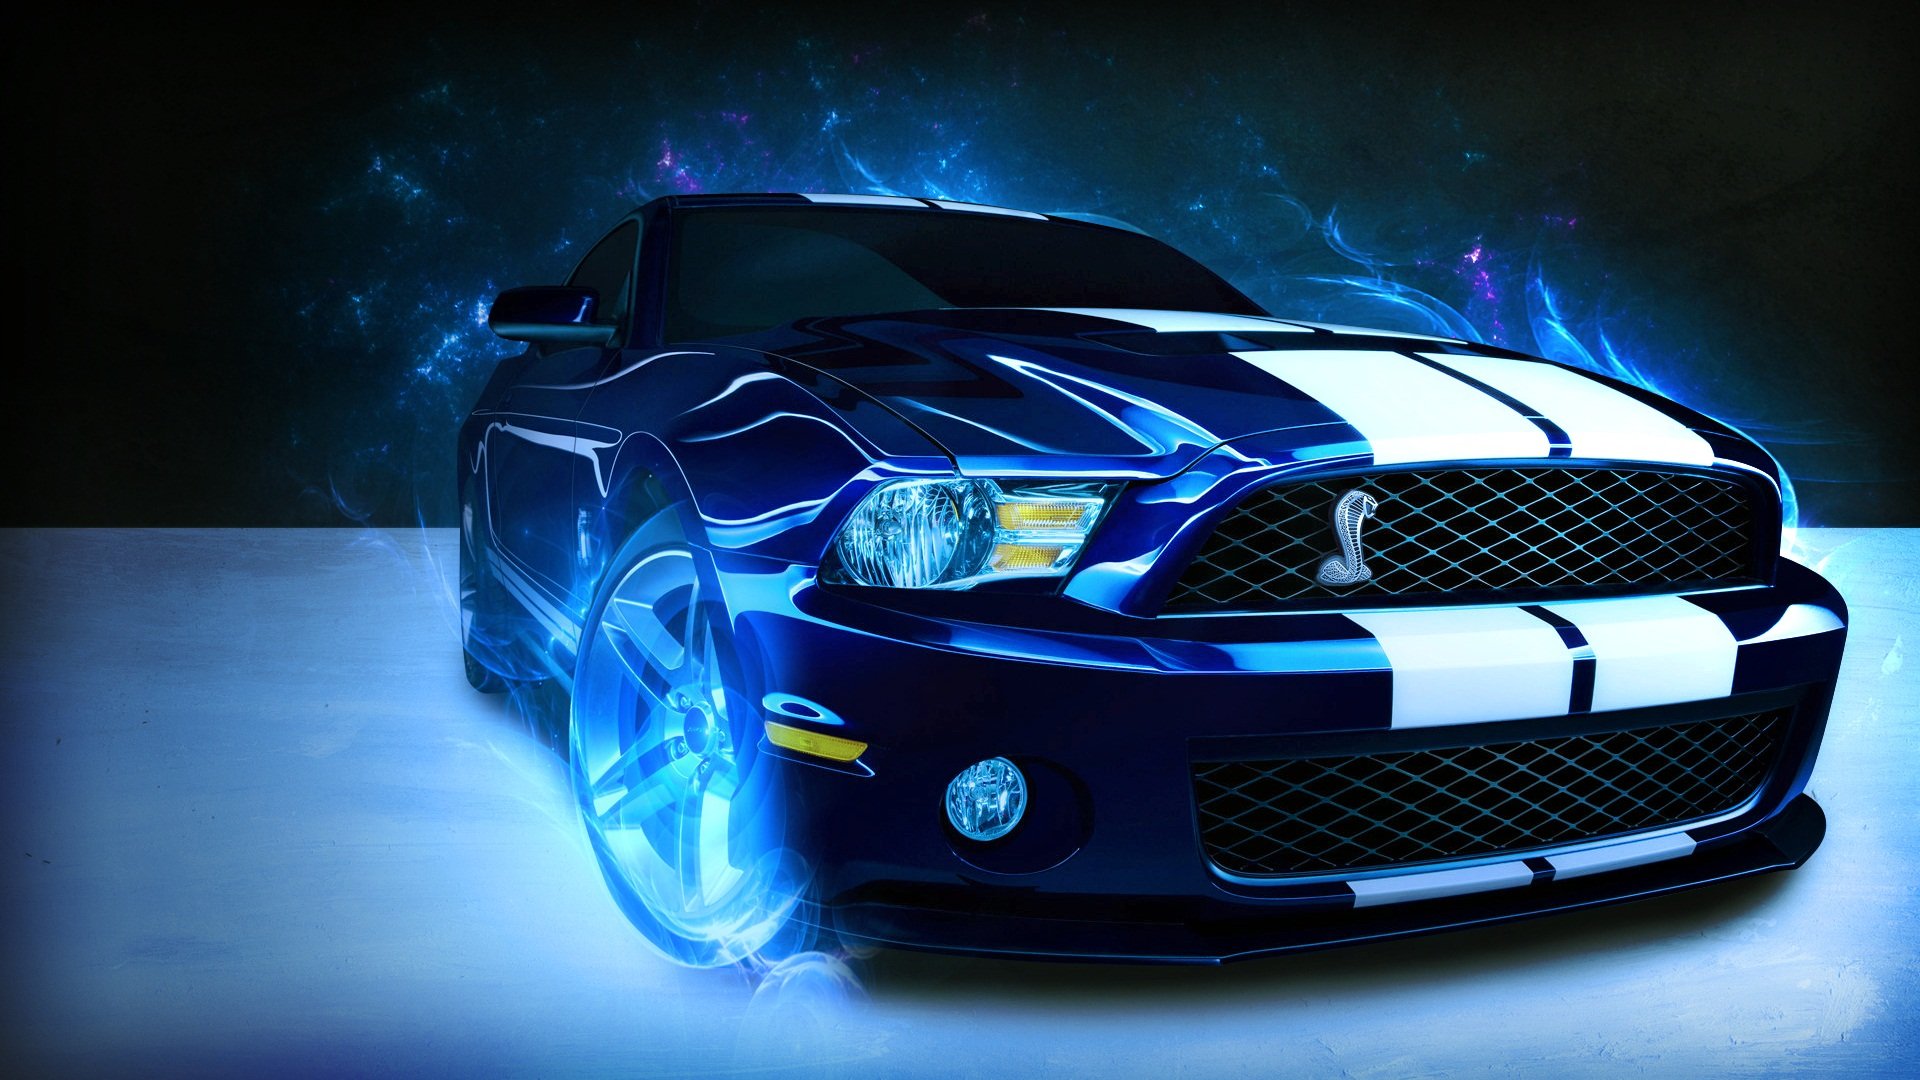 70 Ford Mustang Backgrounds On Wallpapersafari